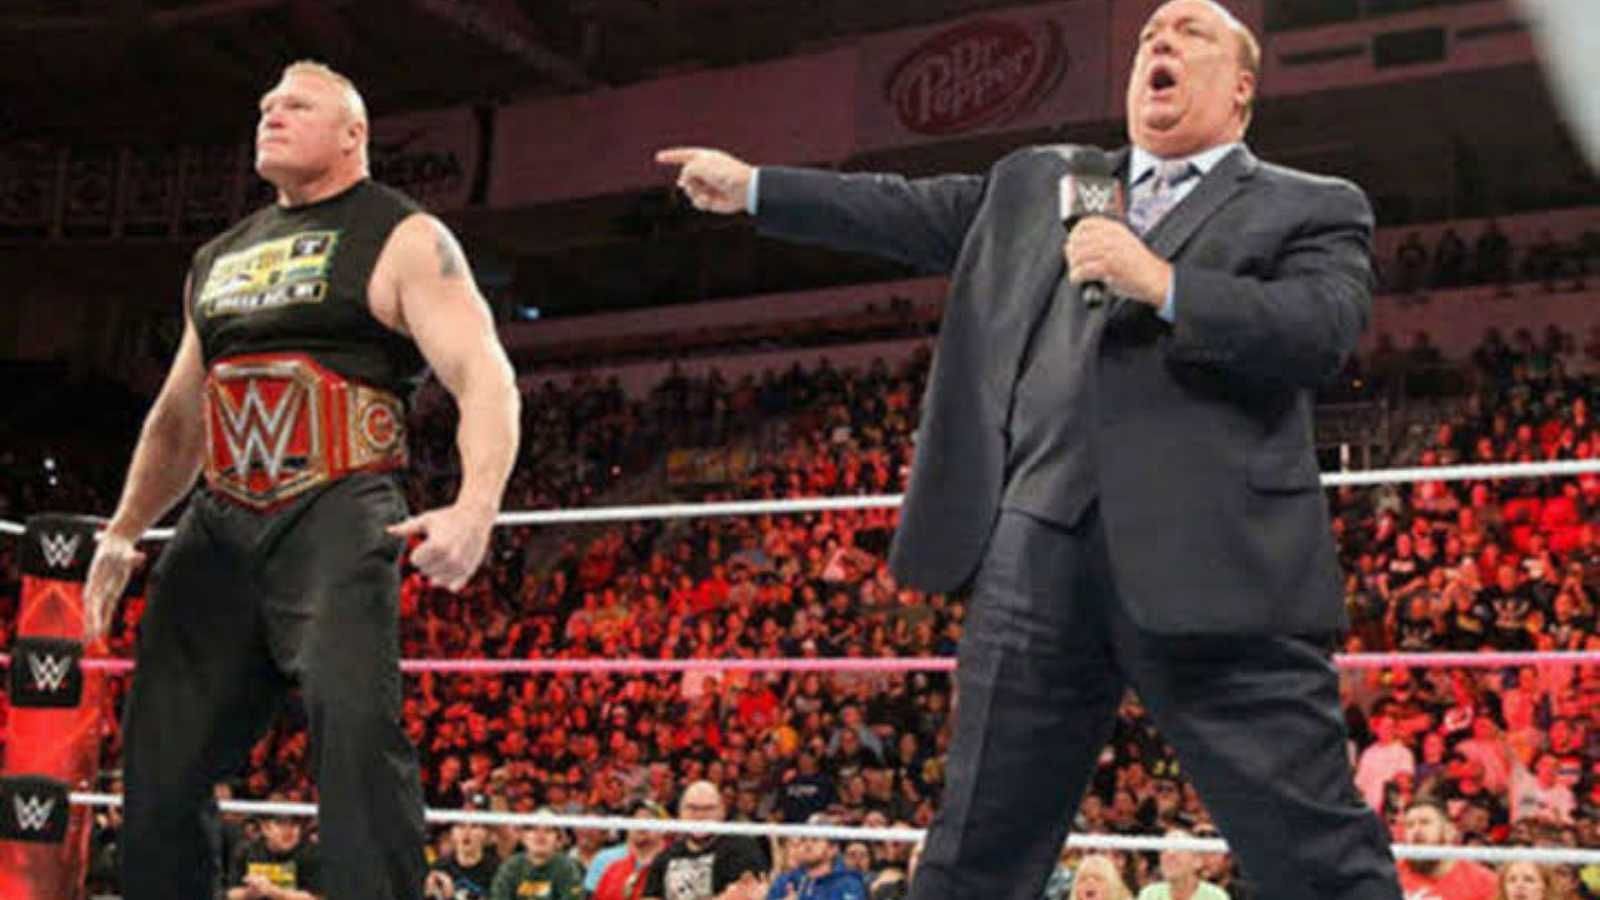 Brock Lesnar has been managed by Paul Heyman for most of his career